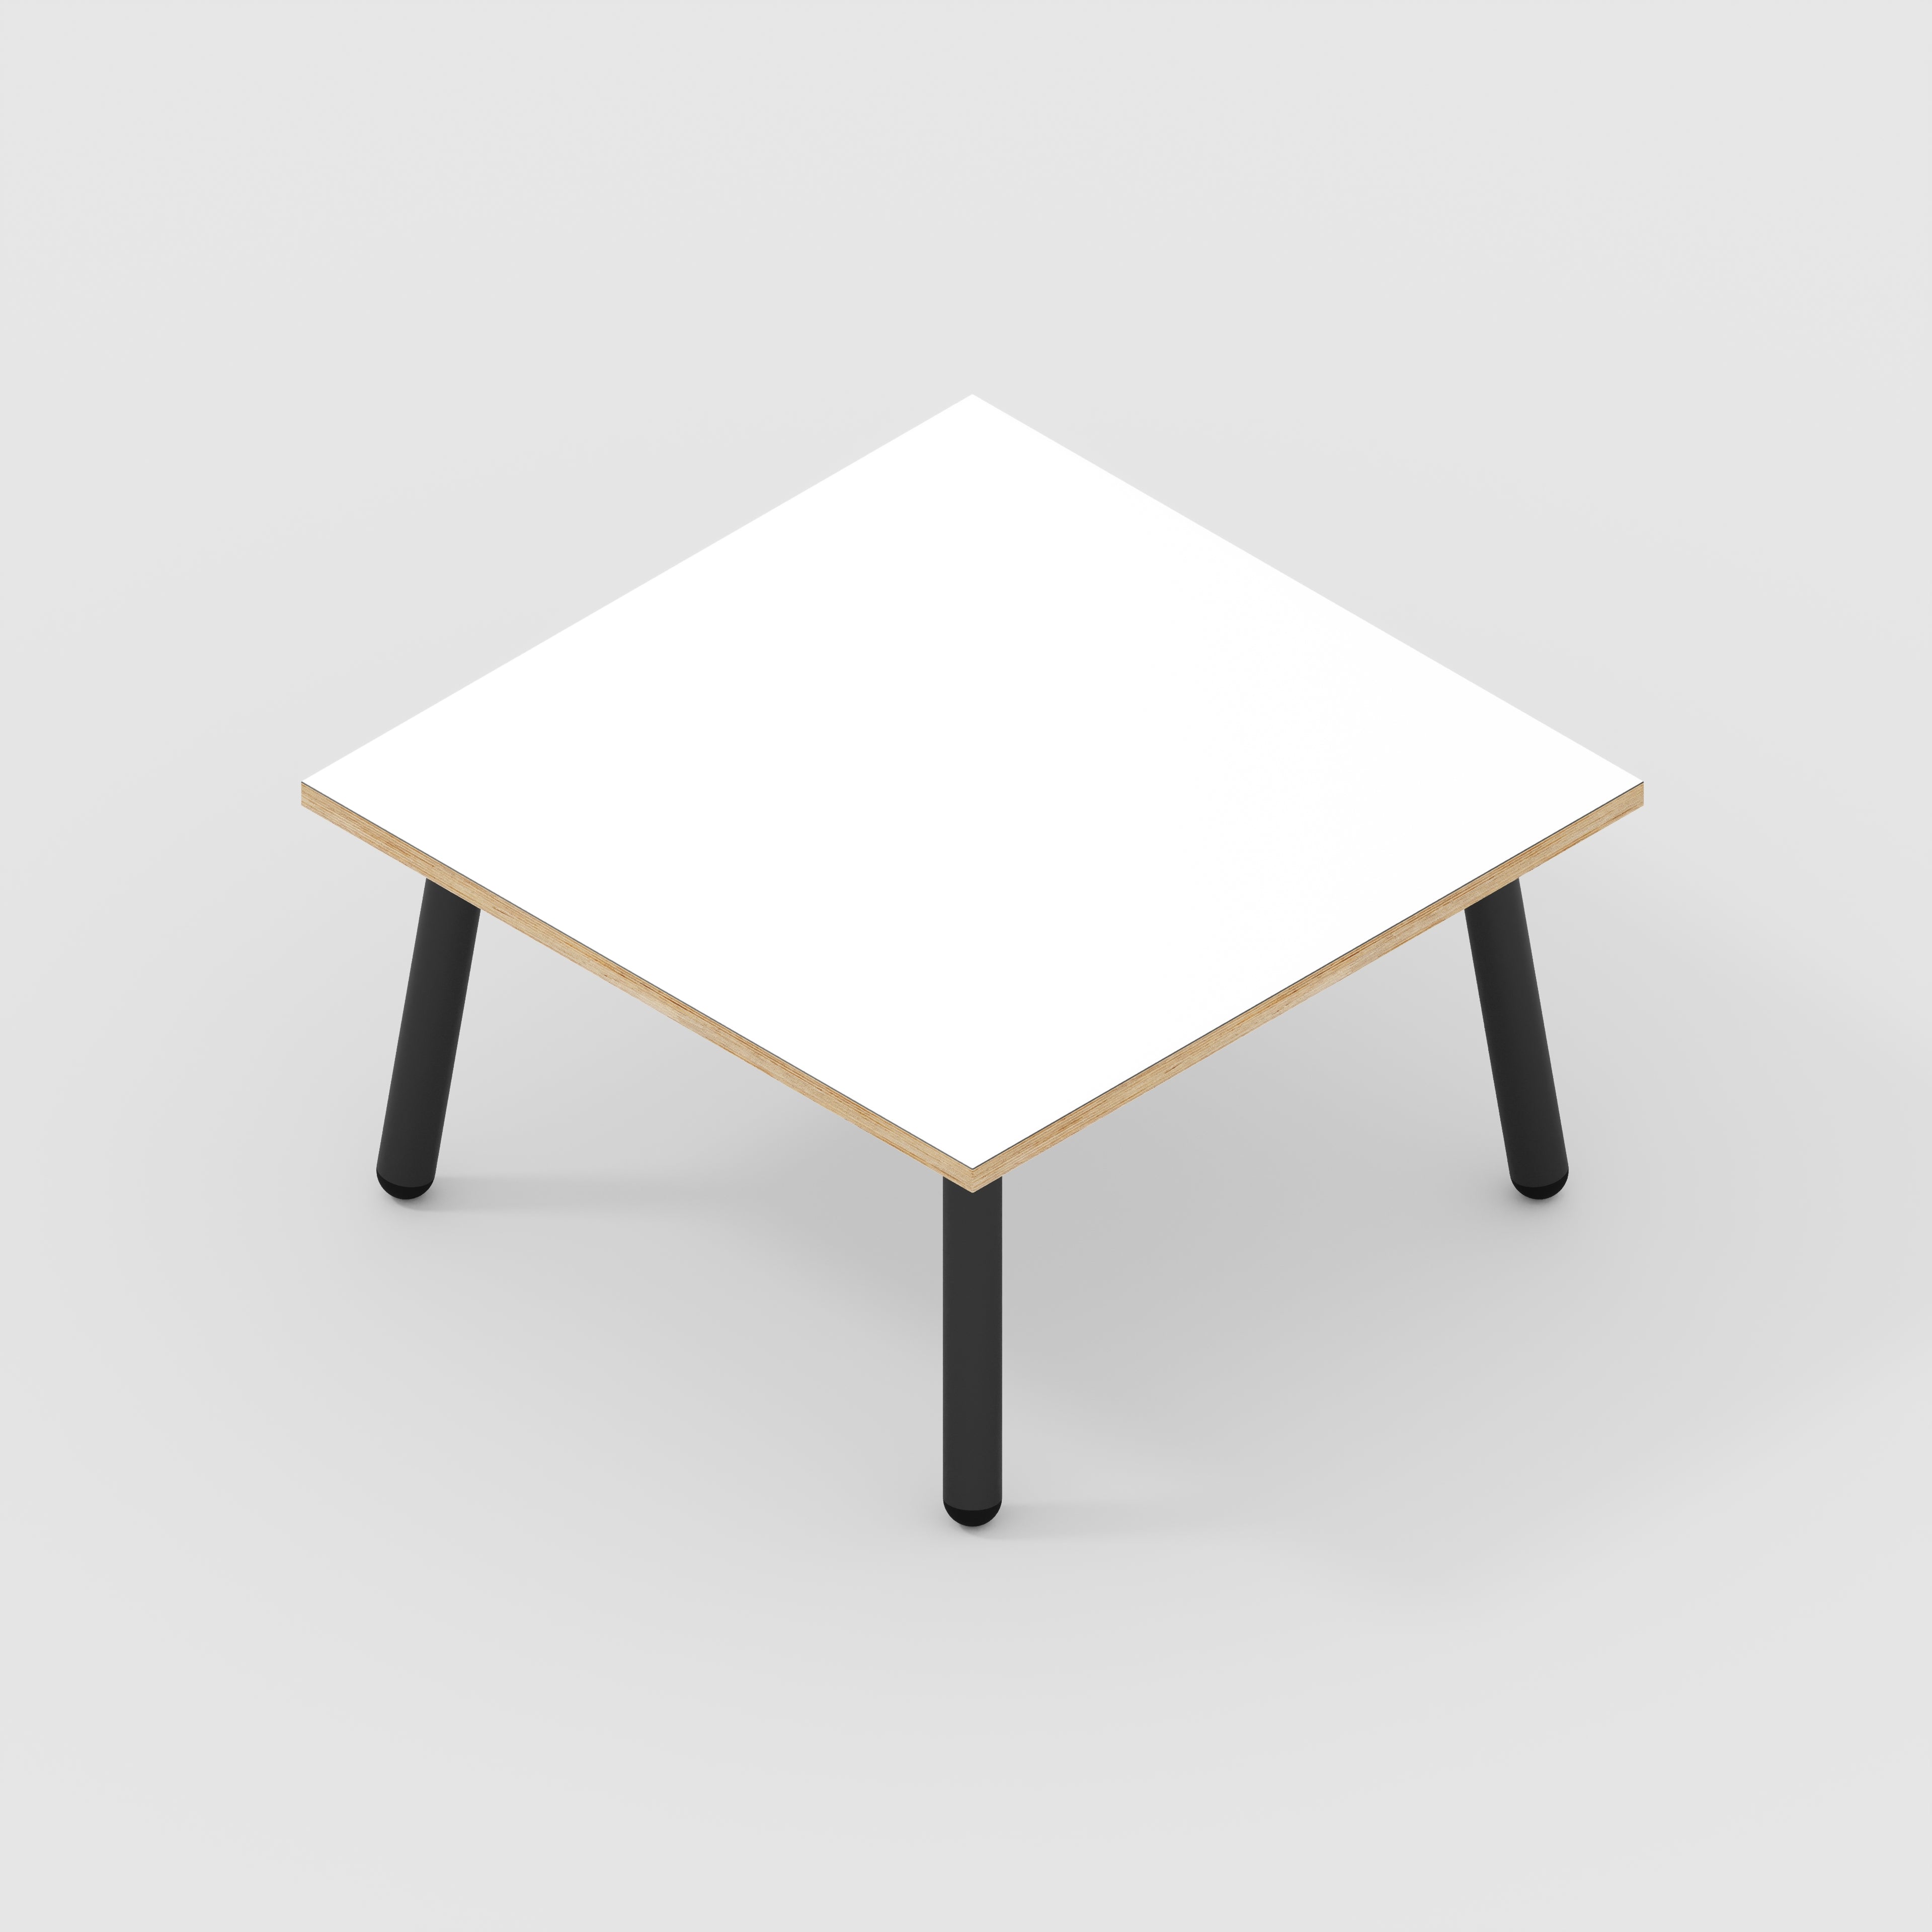 Coffee Table with Black Round Single Pin Legs - Formica White - 800(w) x 800(d) x 425(h)